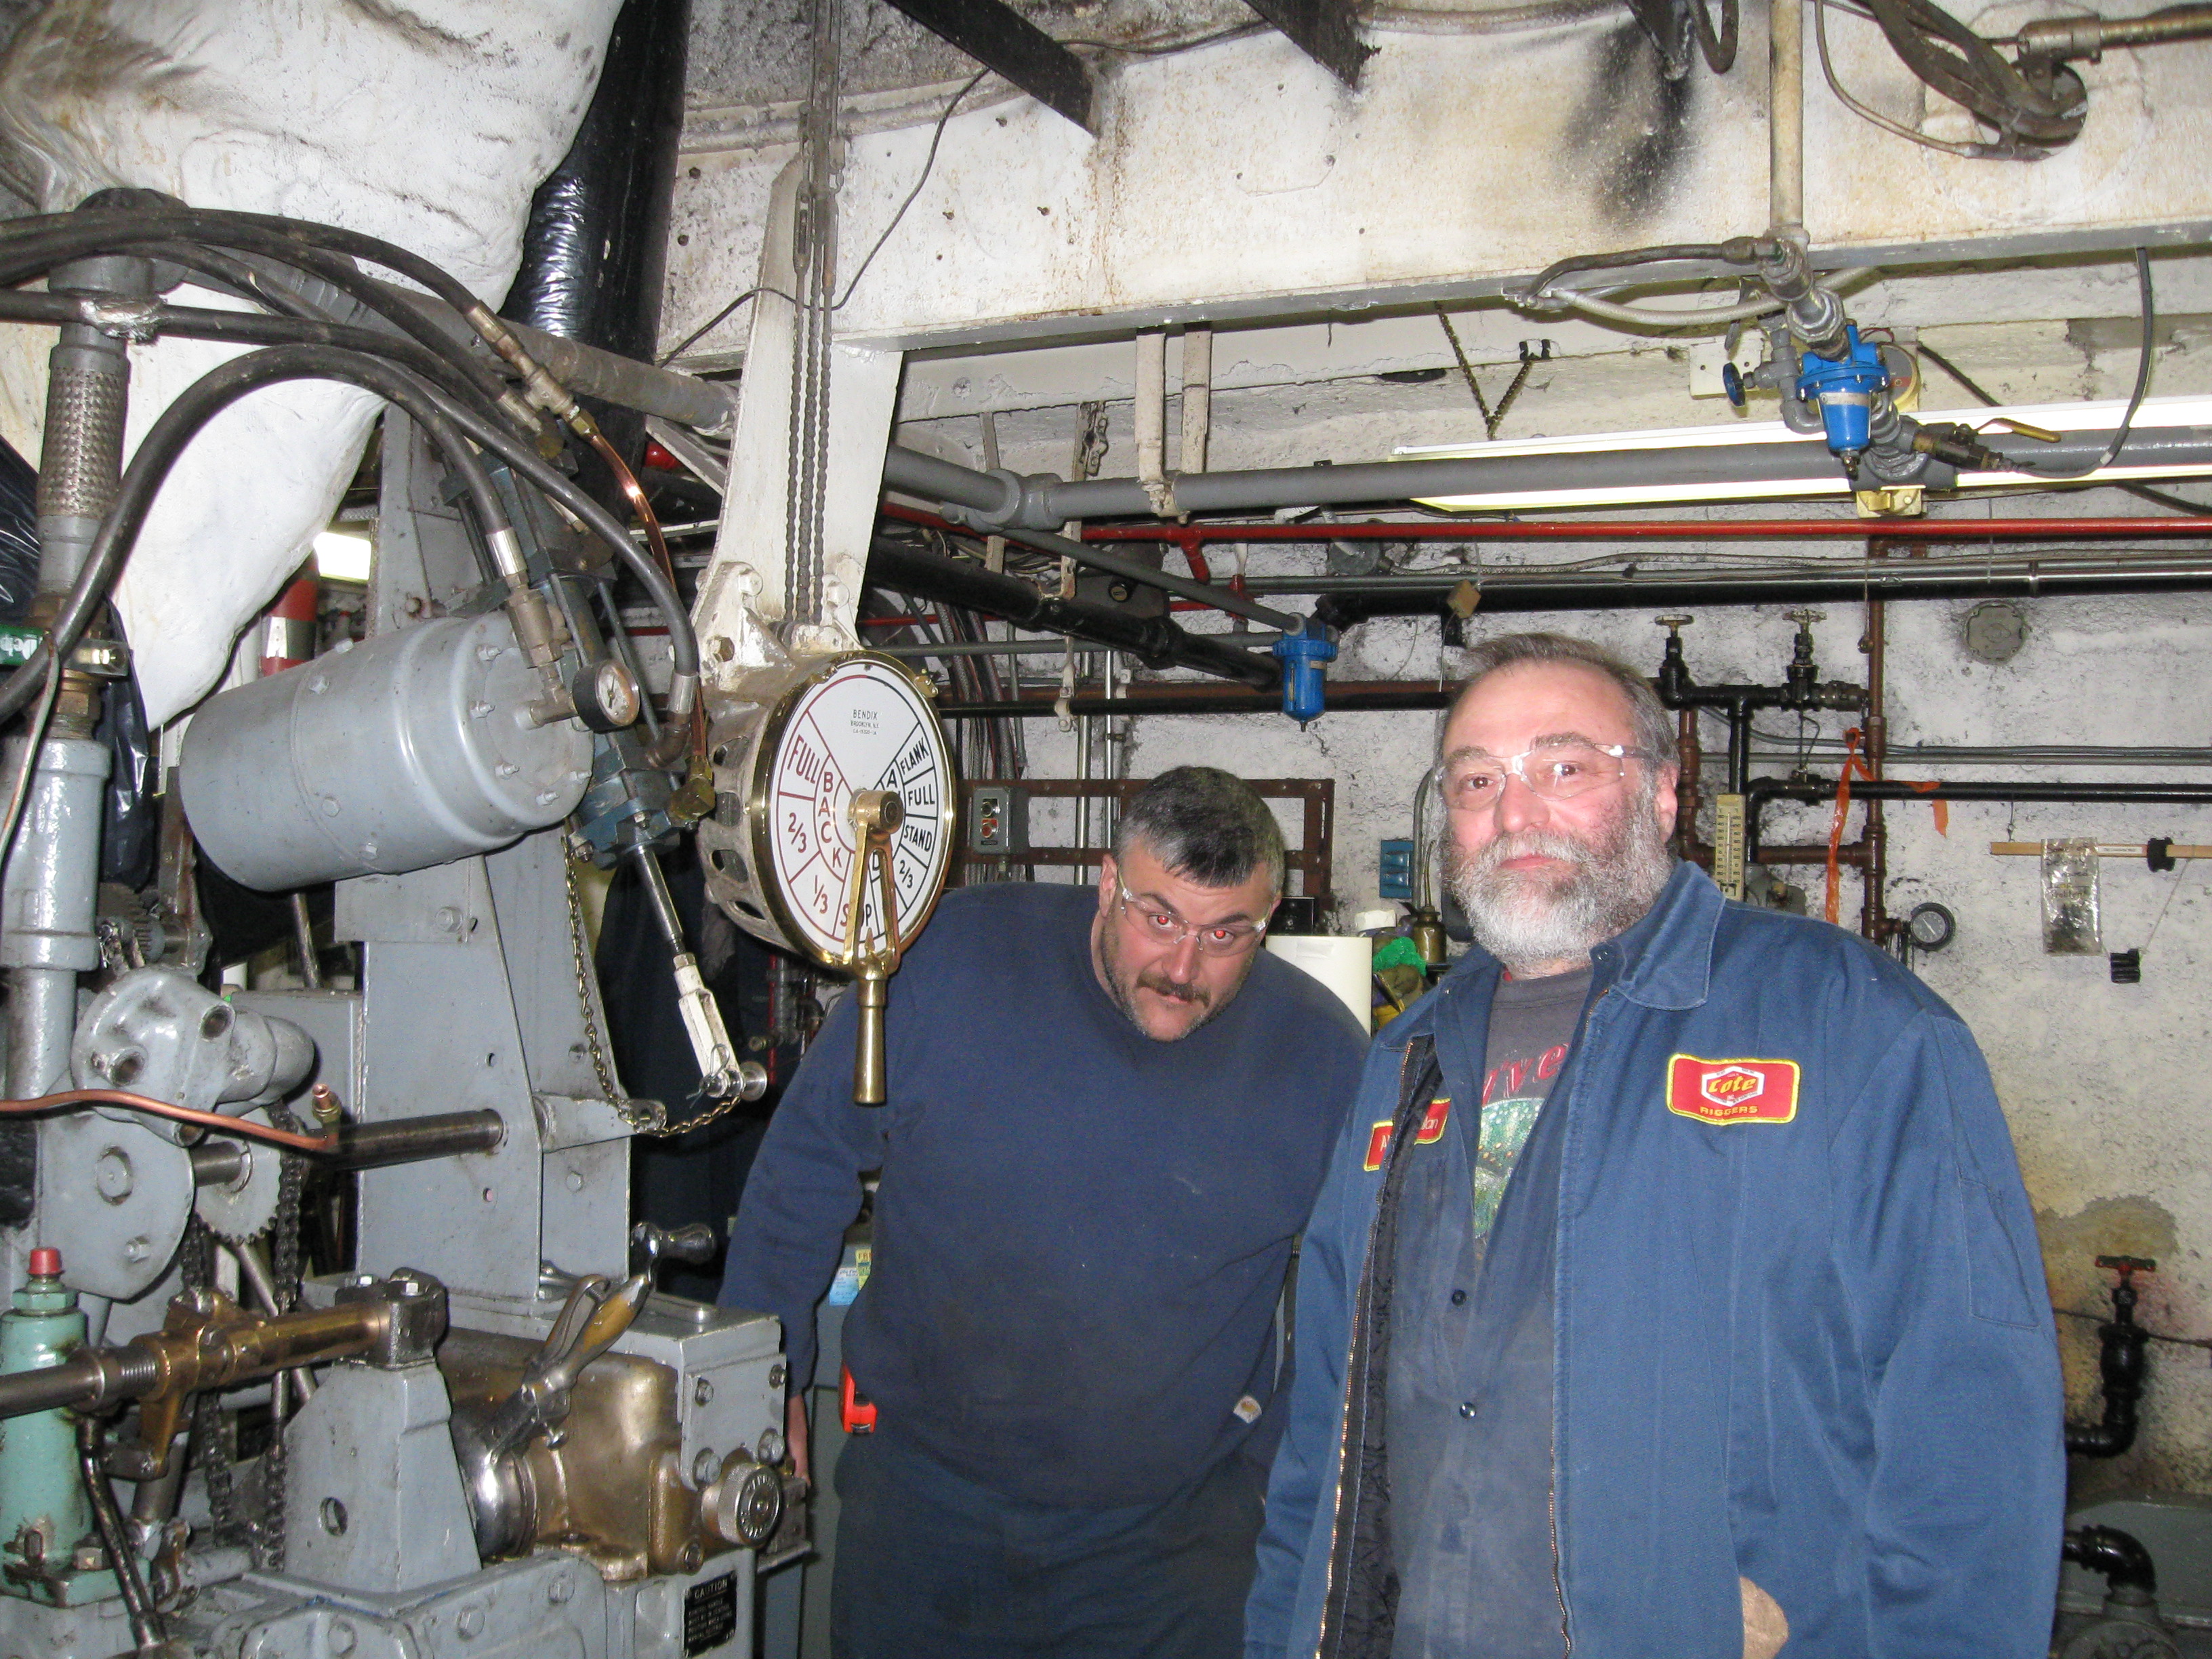 Louis P. Cote, Inc.'s riggers stand next to the engine controls in the MS Mount Washington Cruise ship after removing the engine.